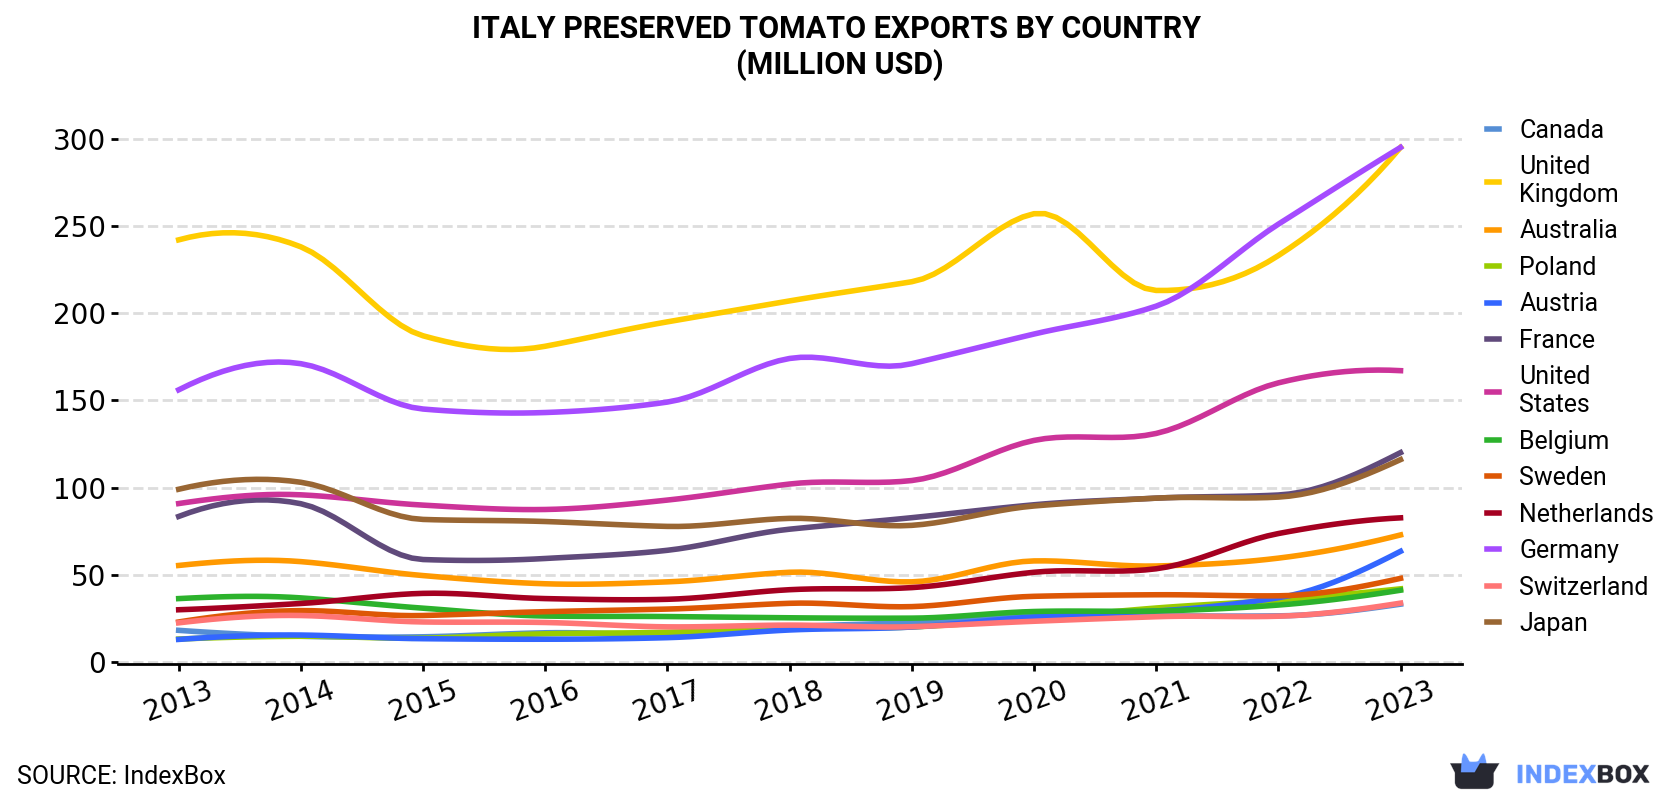 Italy Preserved Tomato Exports By Country (Million USD)